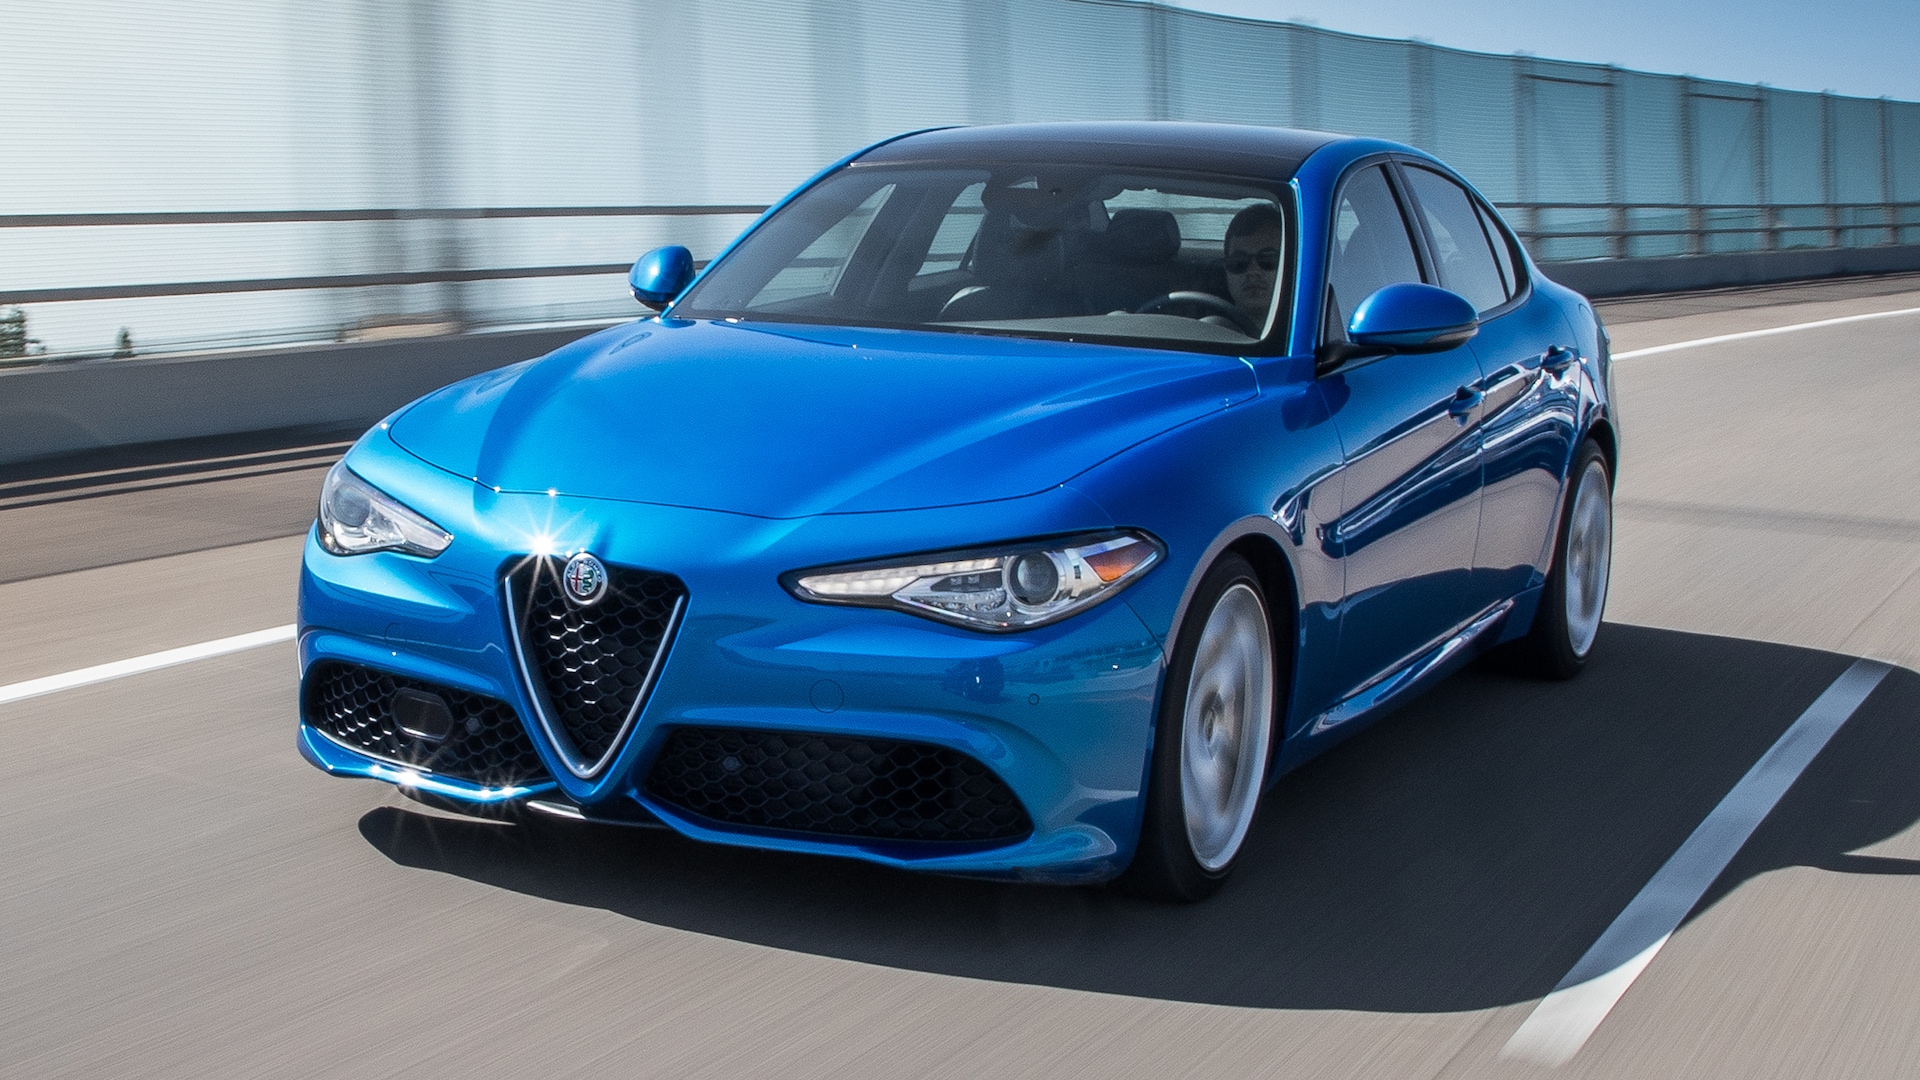 Why We Still Love Our Alfa Romeo Giulia a Year Later